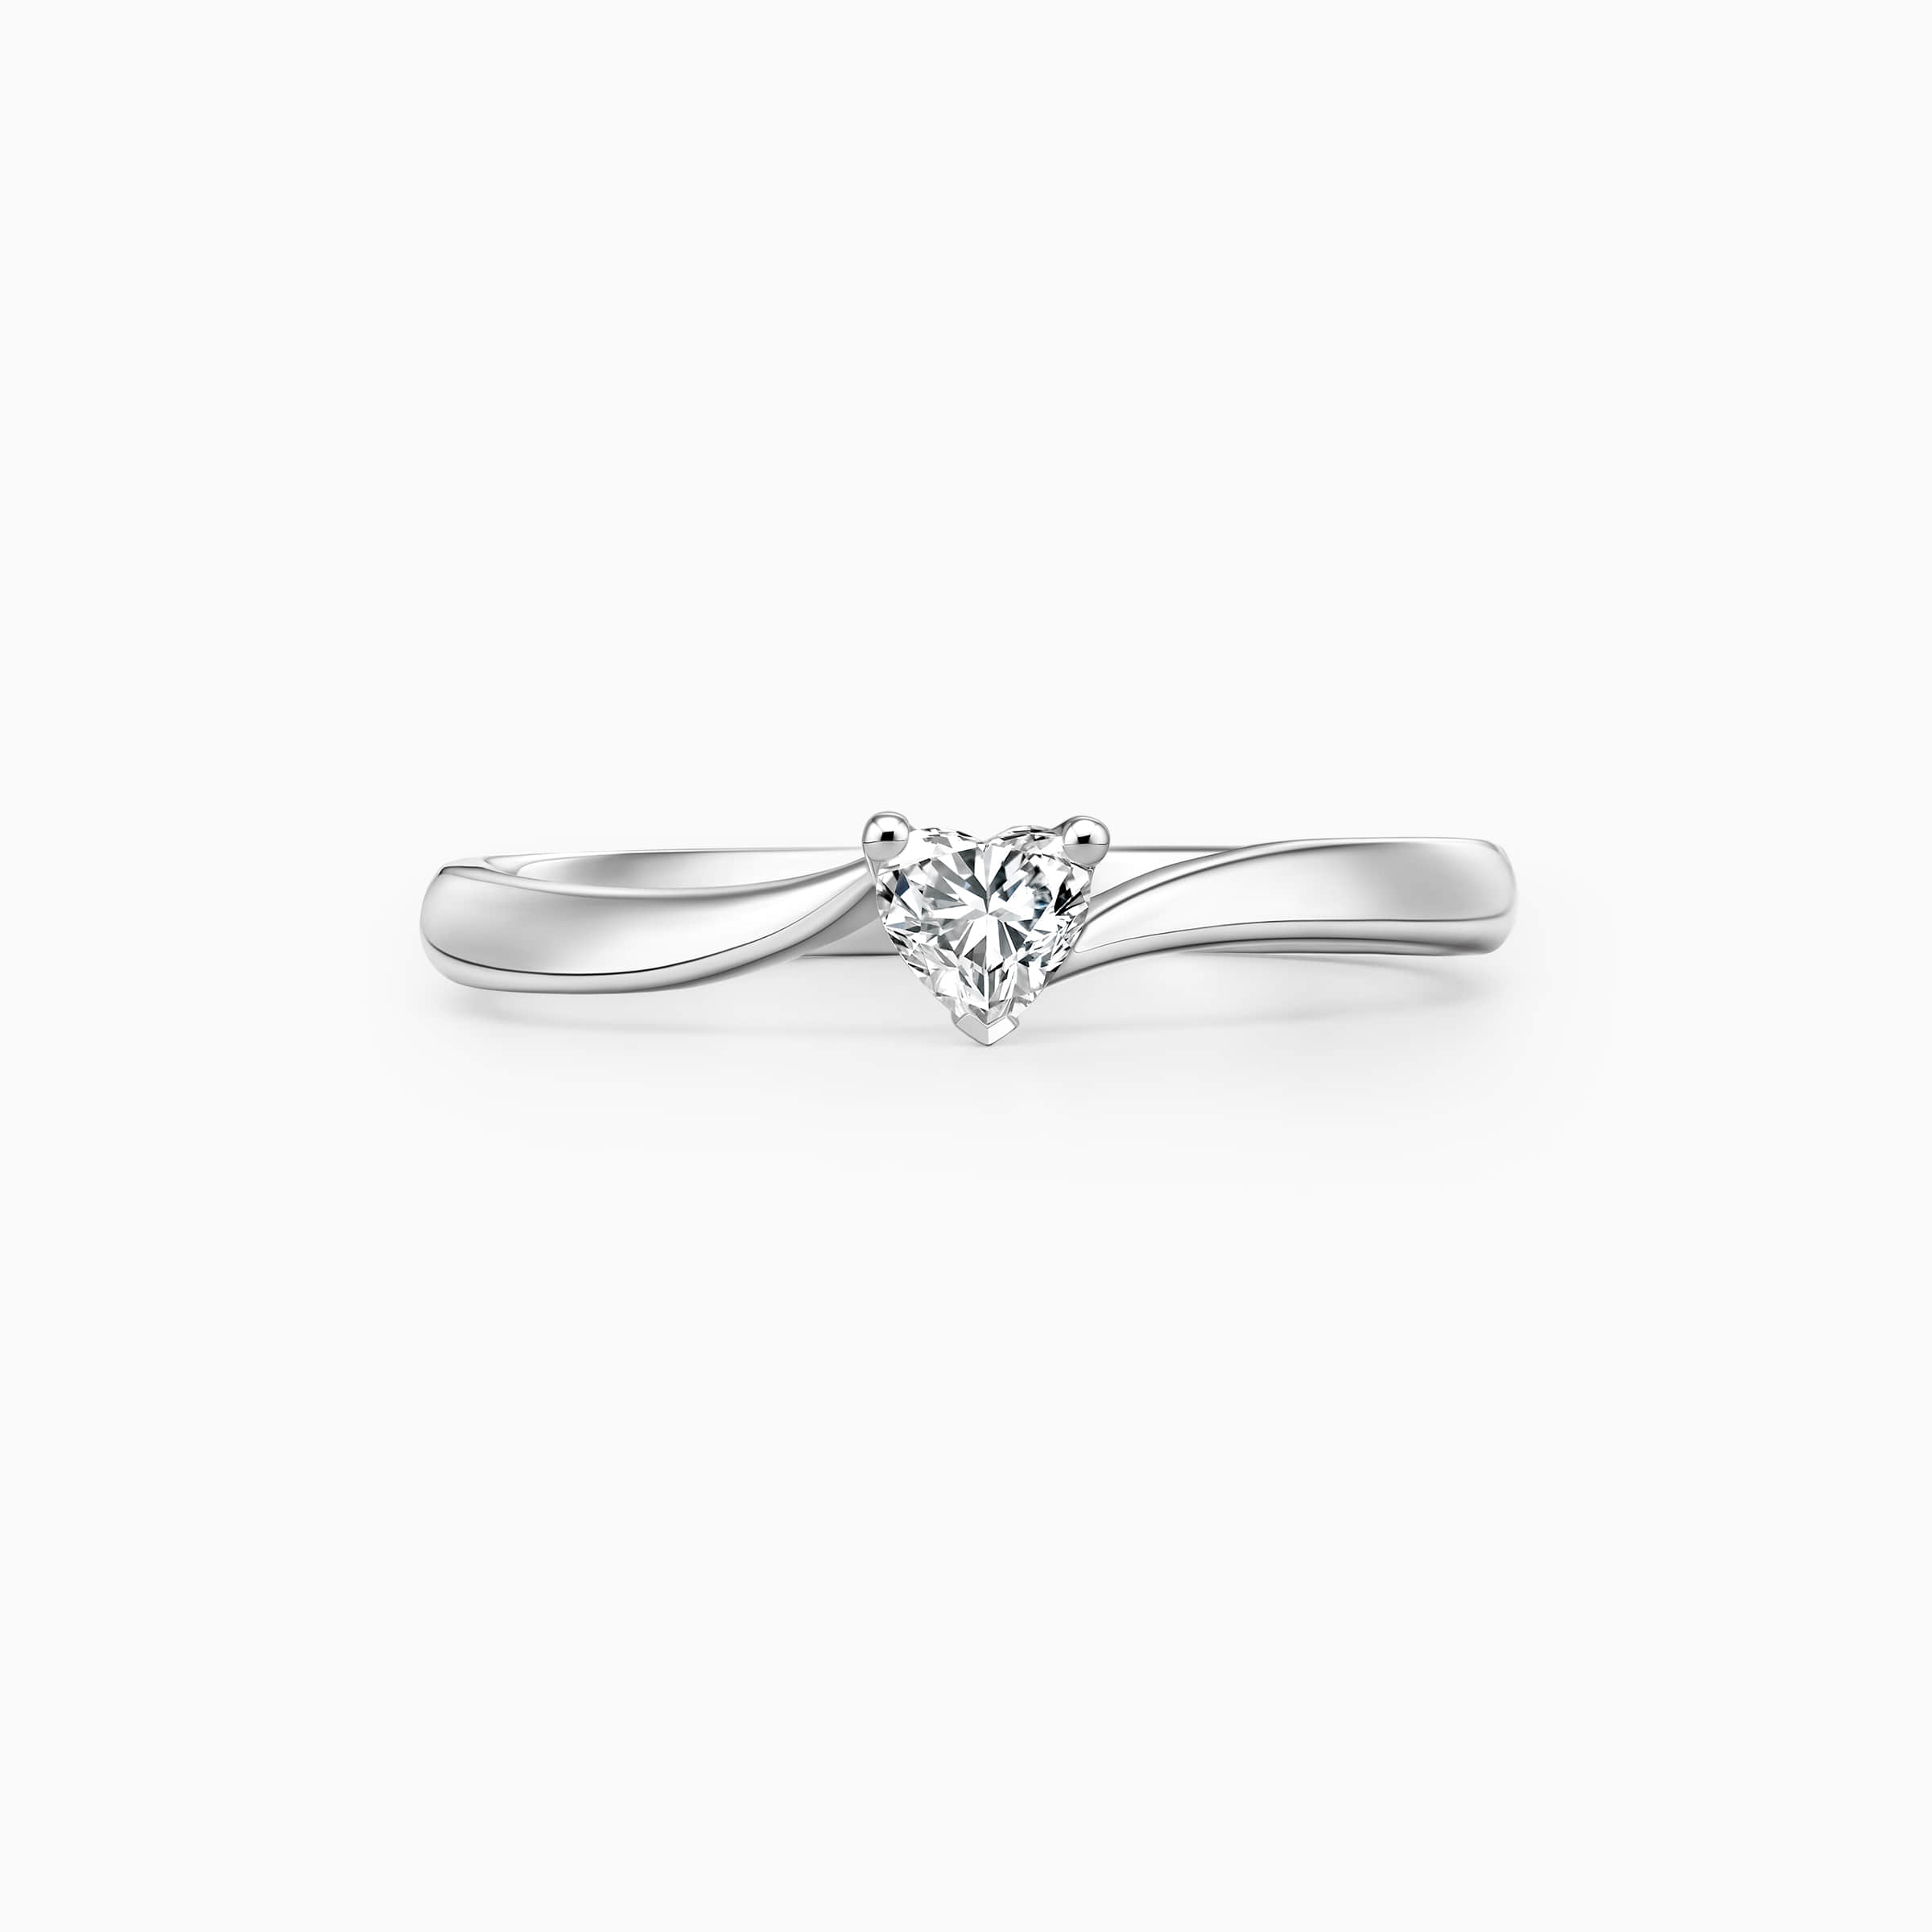 Darry Ring heart solitaire promise ring front view